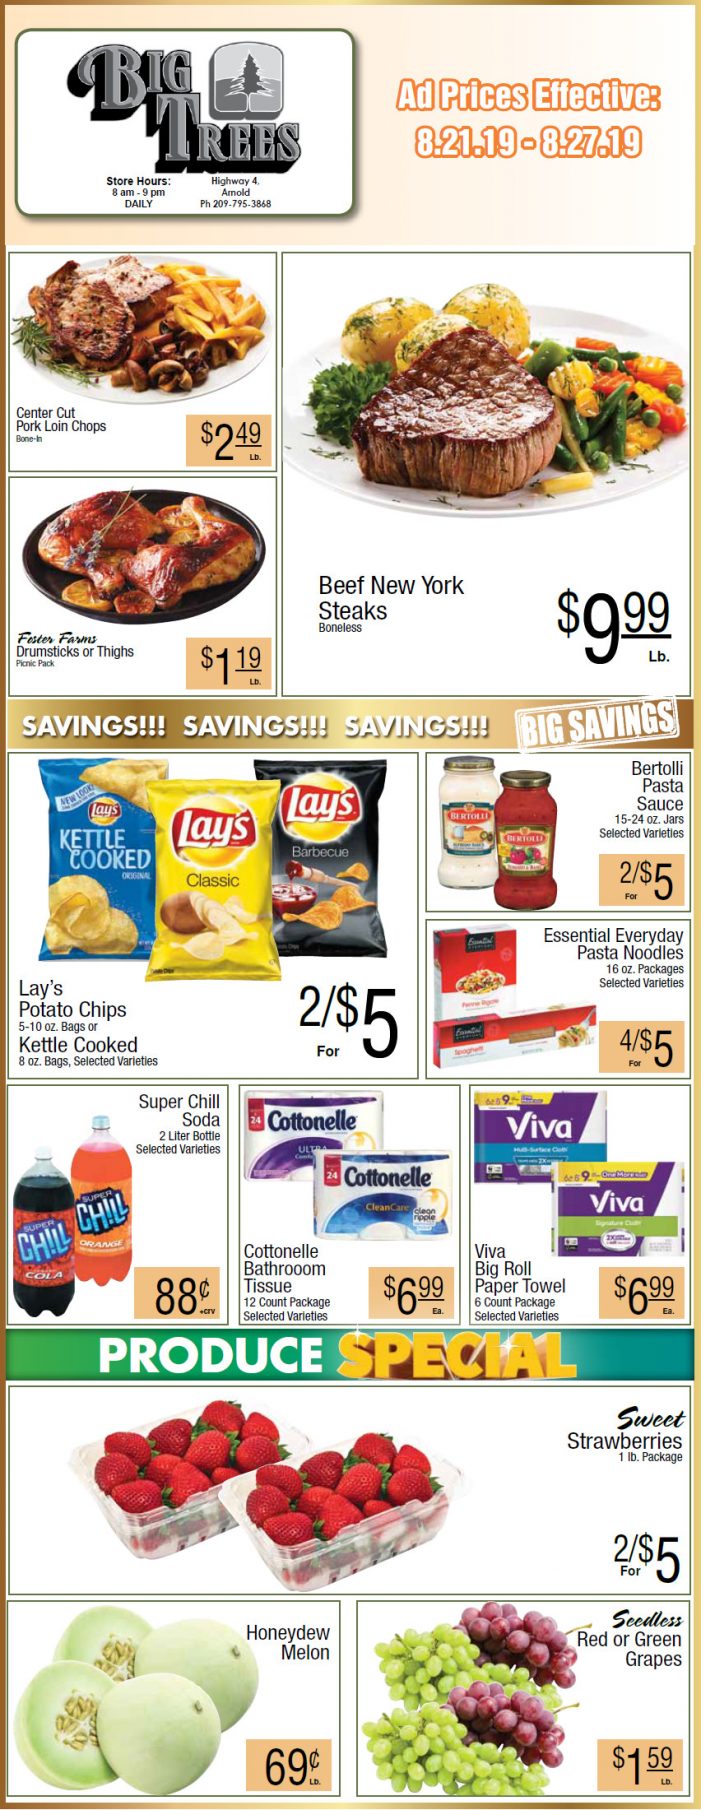 Big Trees Market Weekly Ad & Grocery Specials Through August 27th